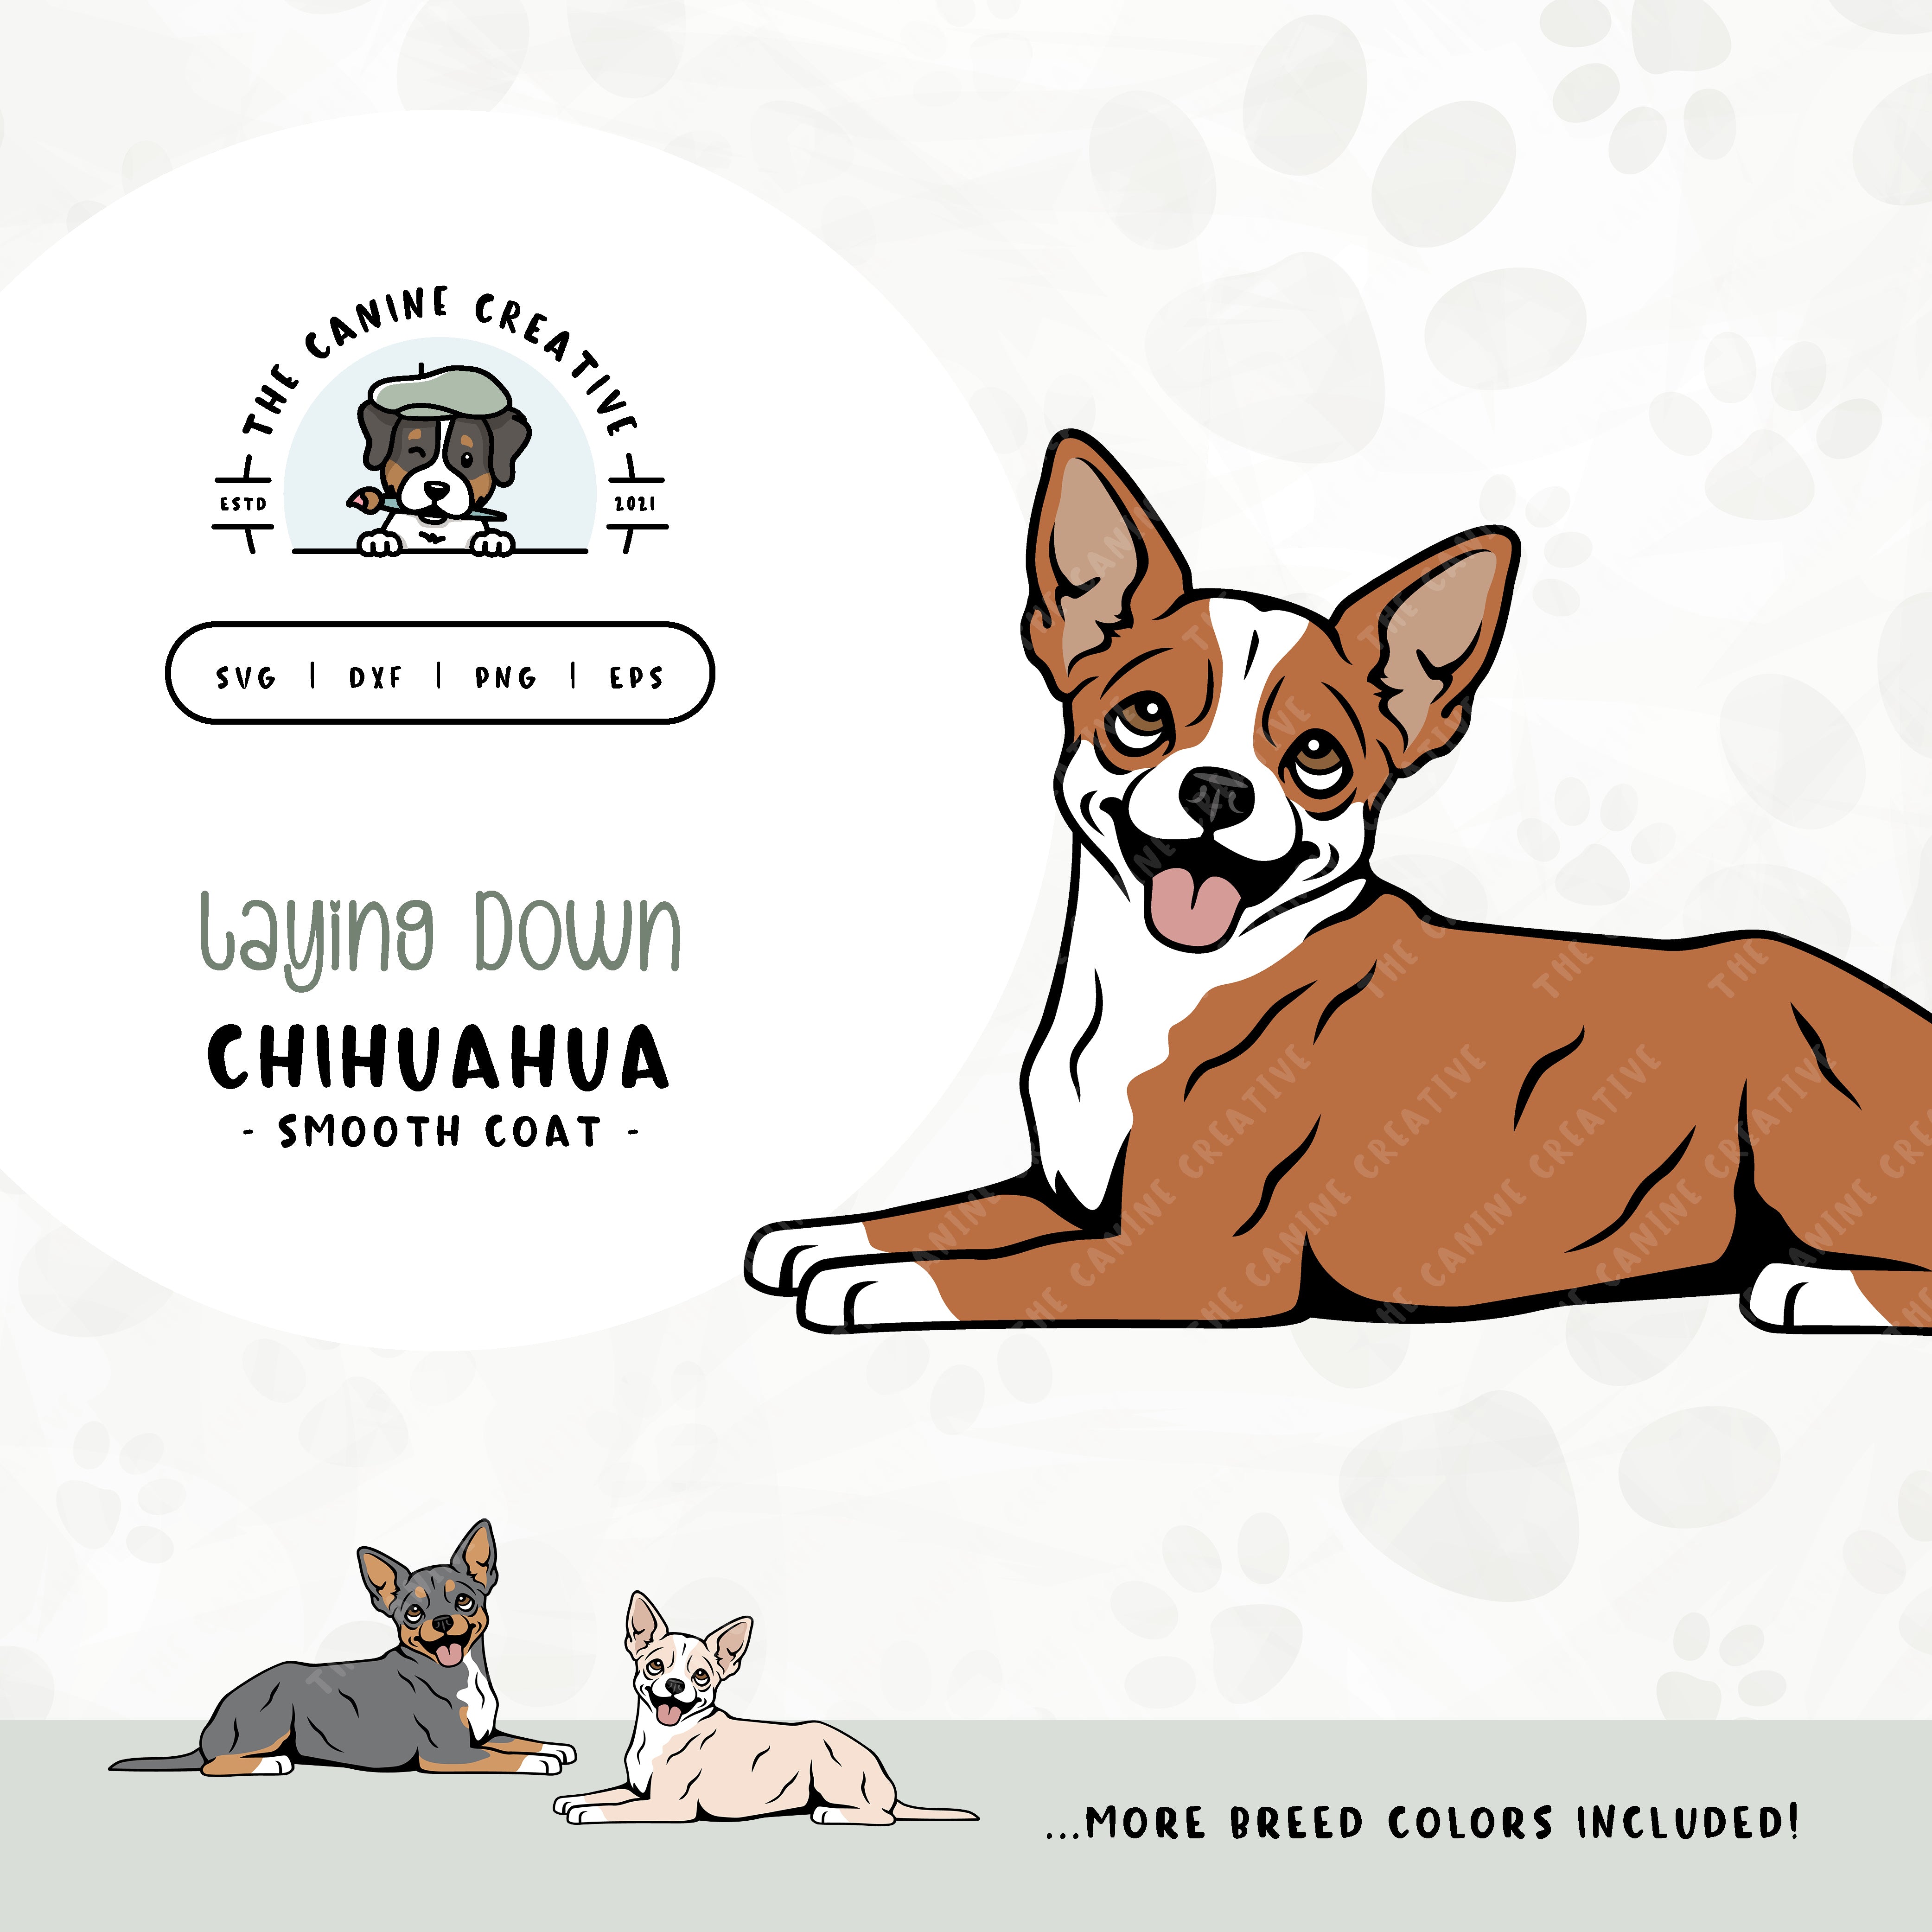 This laying down dog design features a Smooth Coat Chihuahua. File formats include: SVG, DXF, PNG, and EPS.